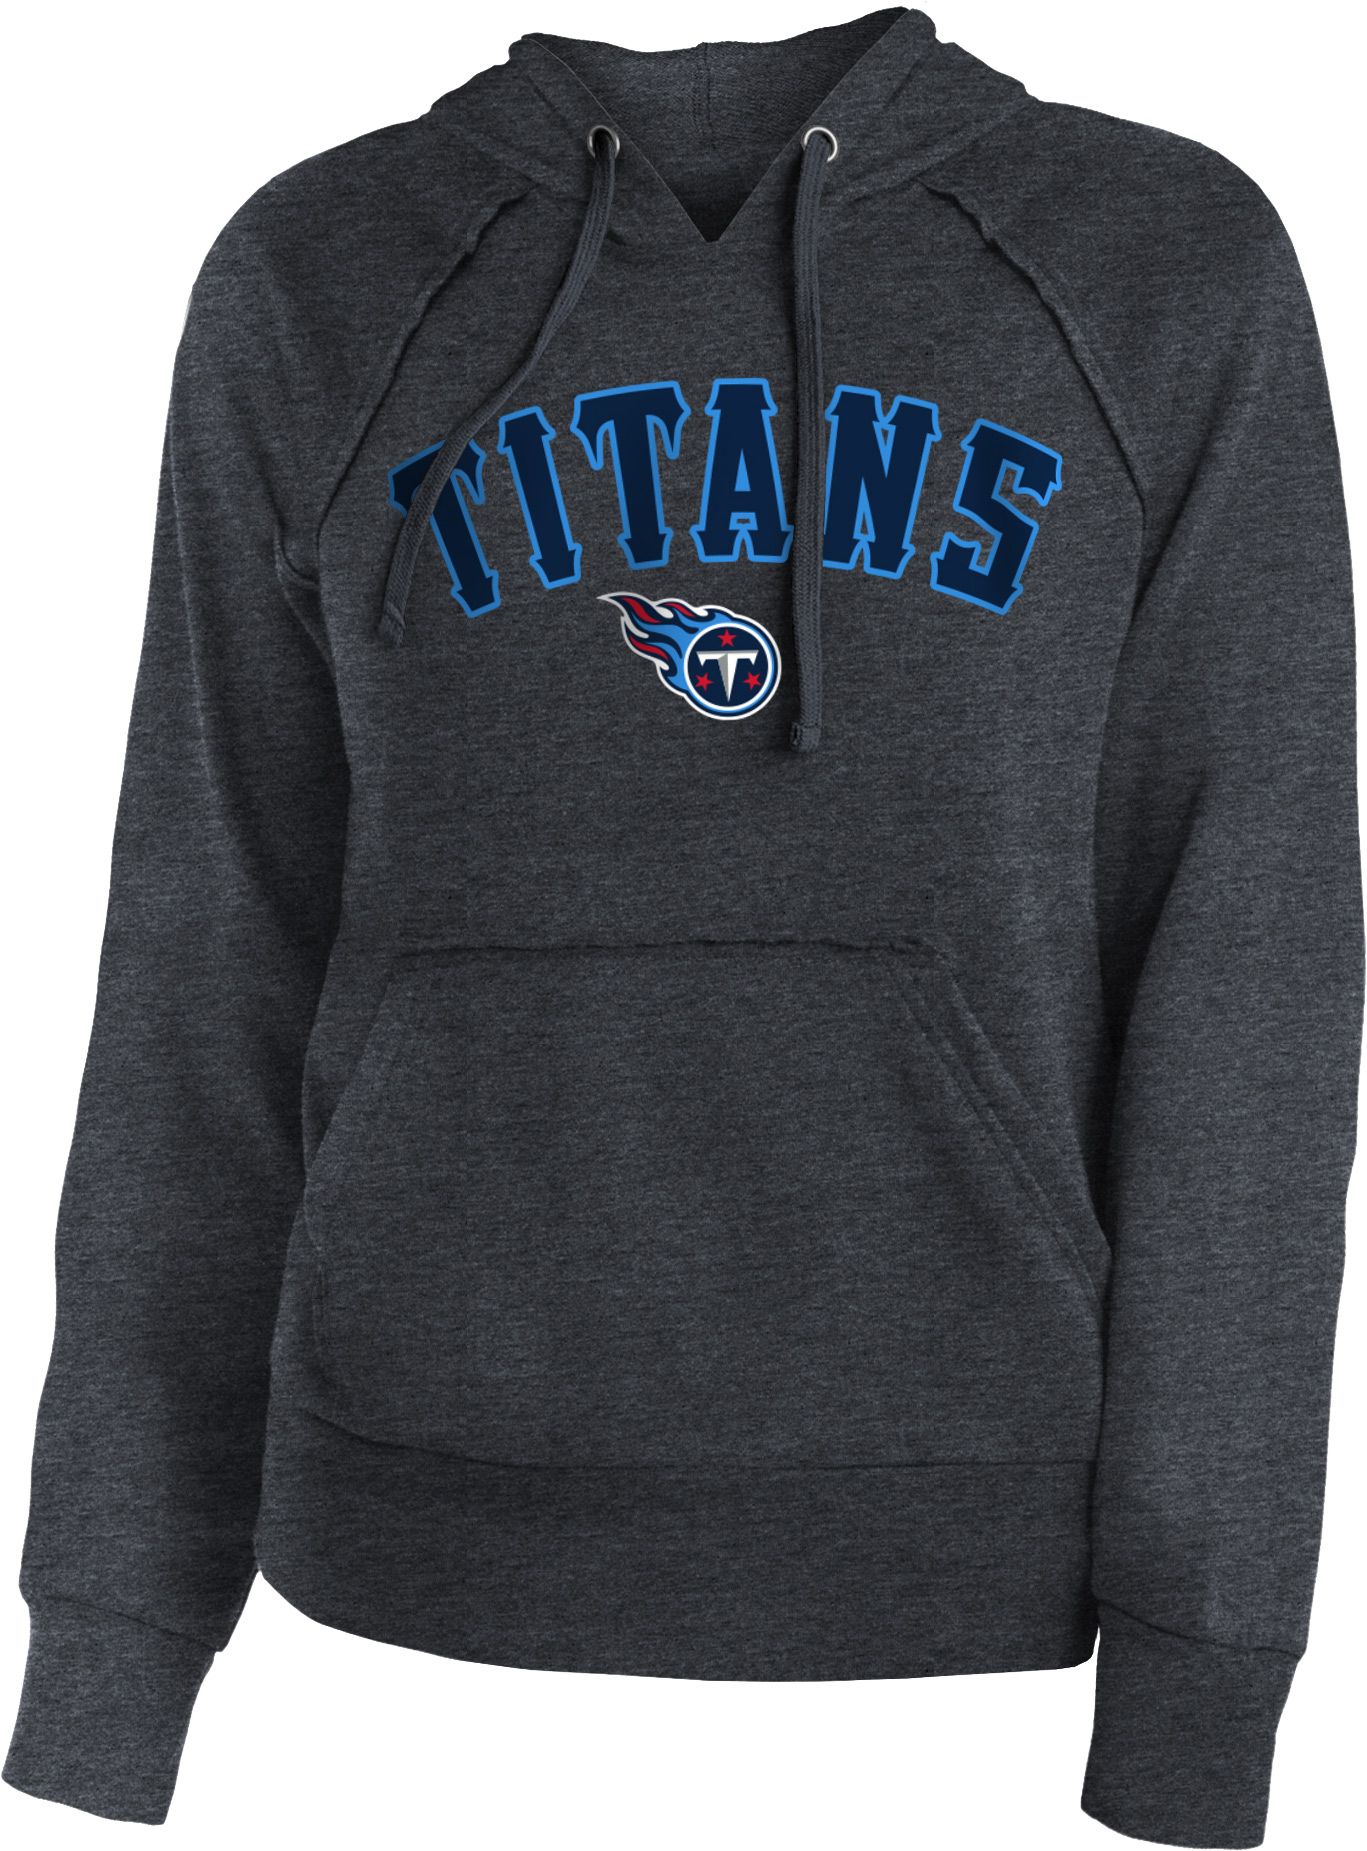 New Era / Apparel Women's Tennessee Titans Graphic Charcoal Hoodie